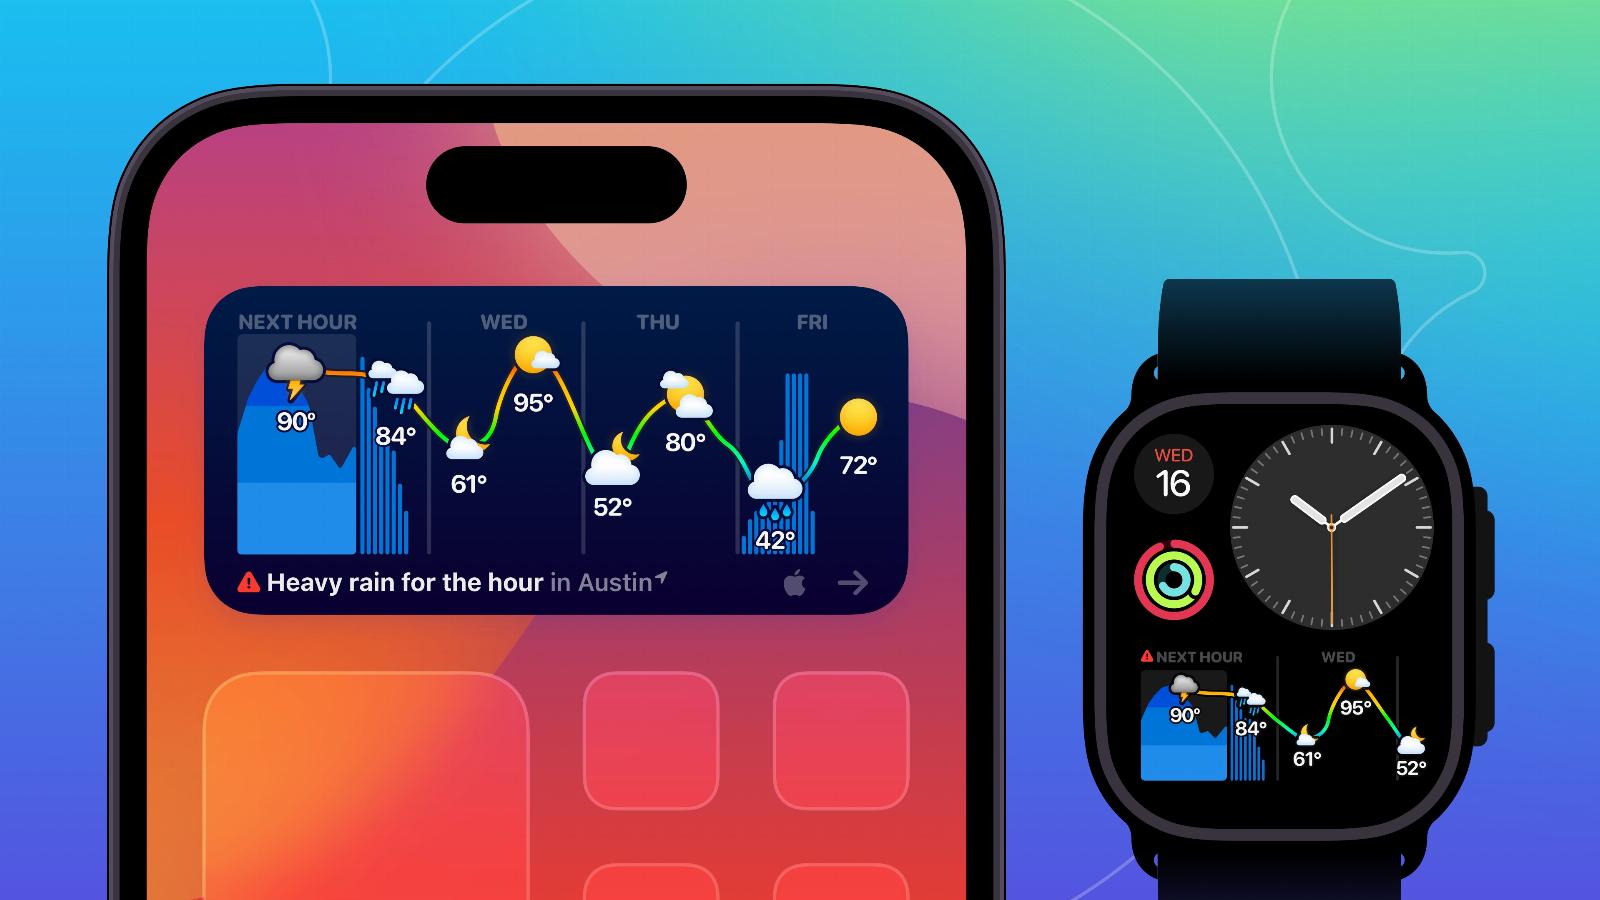 Weather Up puts a fully interactive weather app into an iOS widget